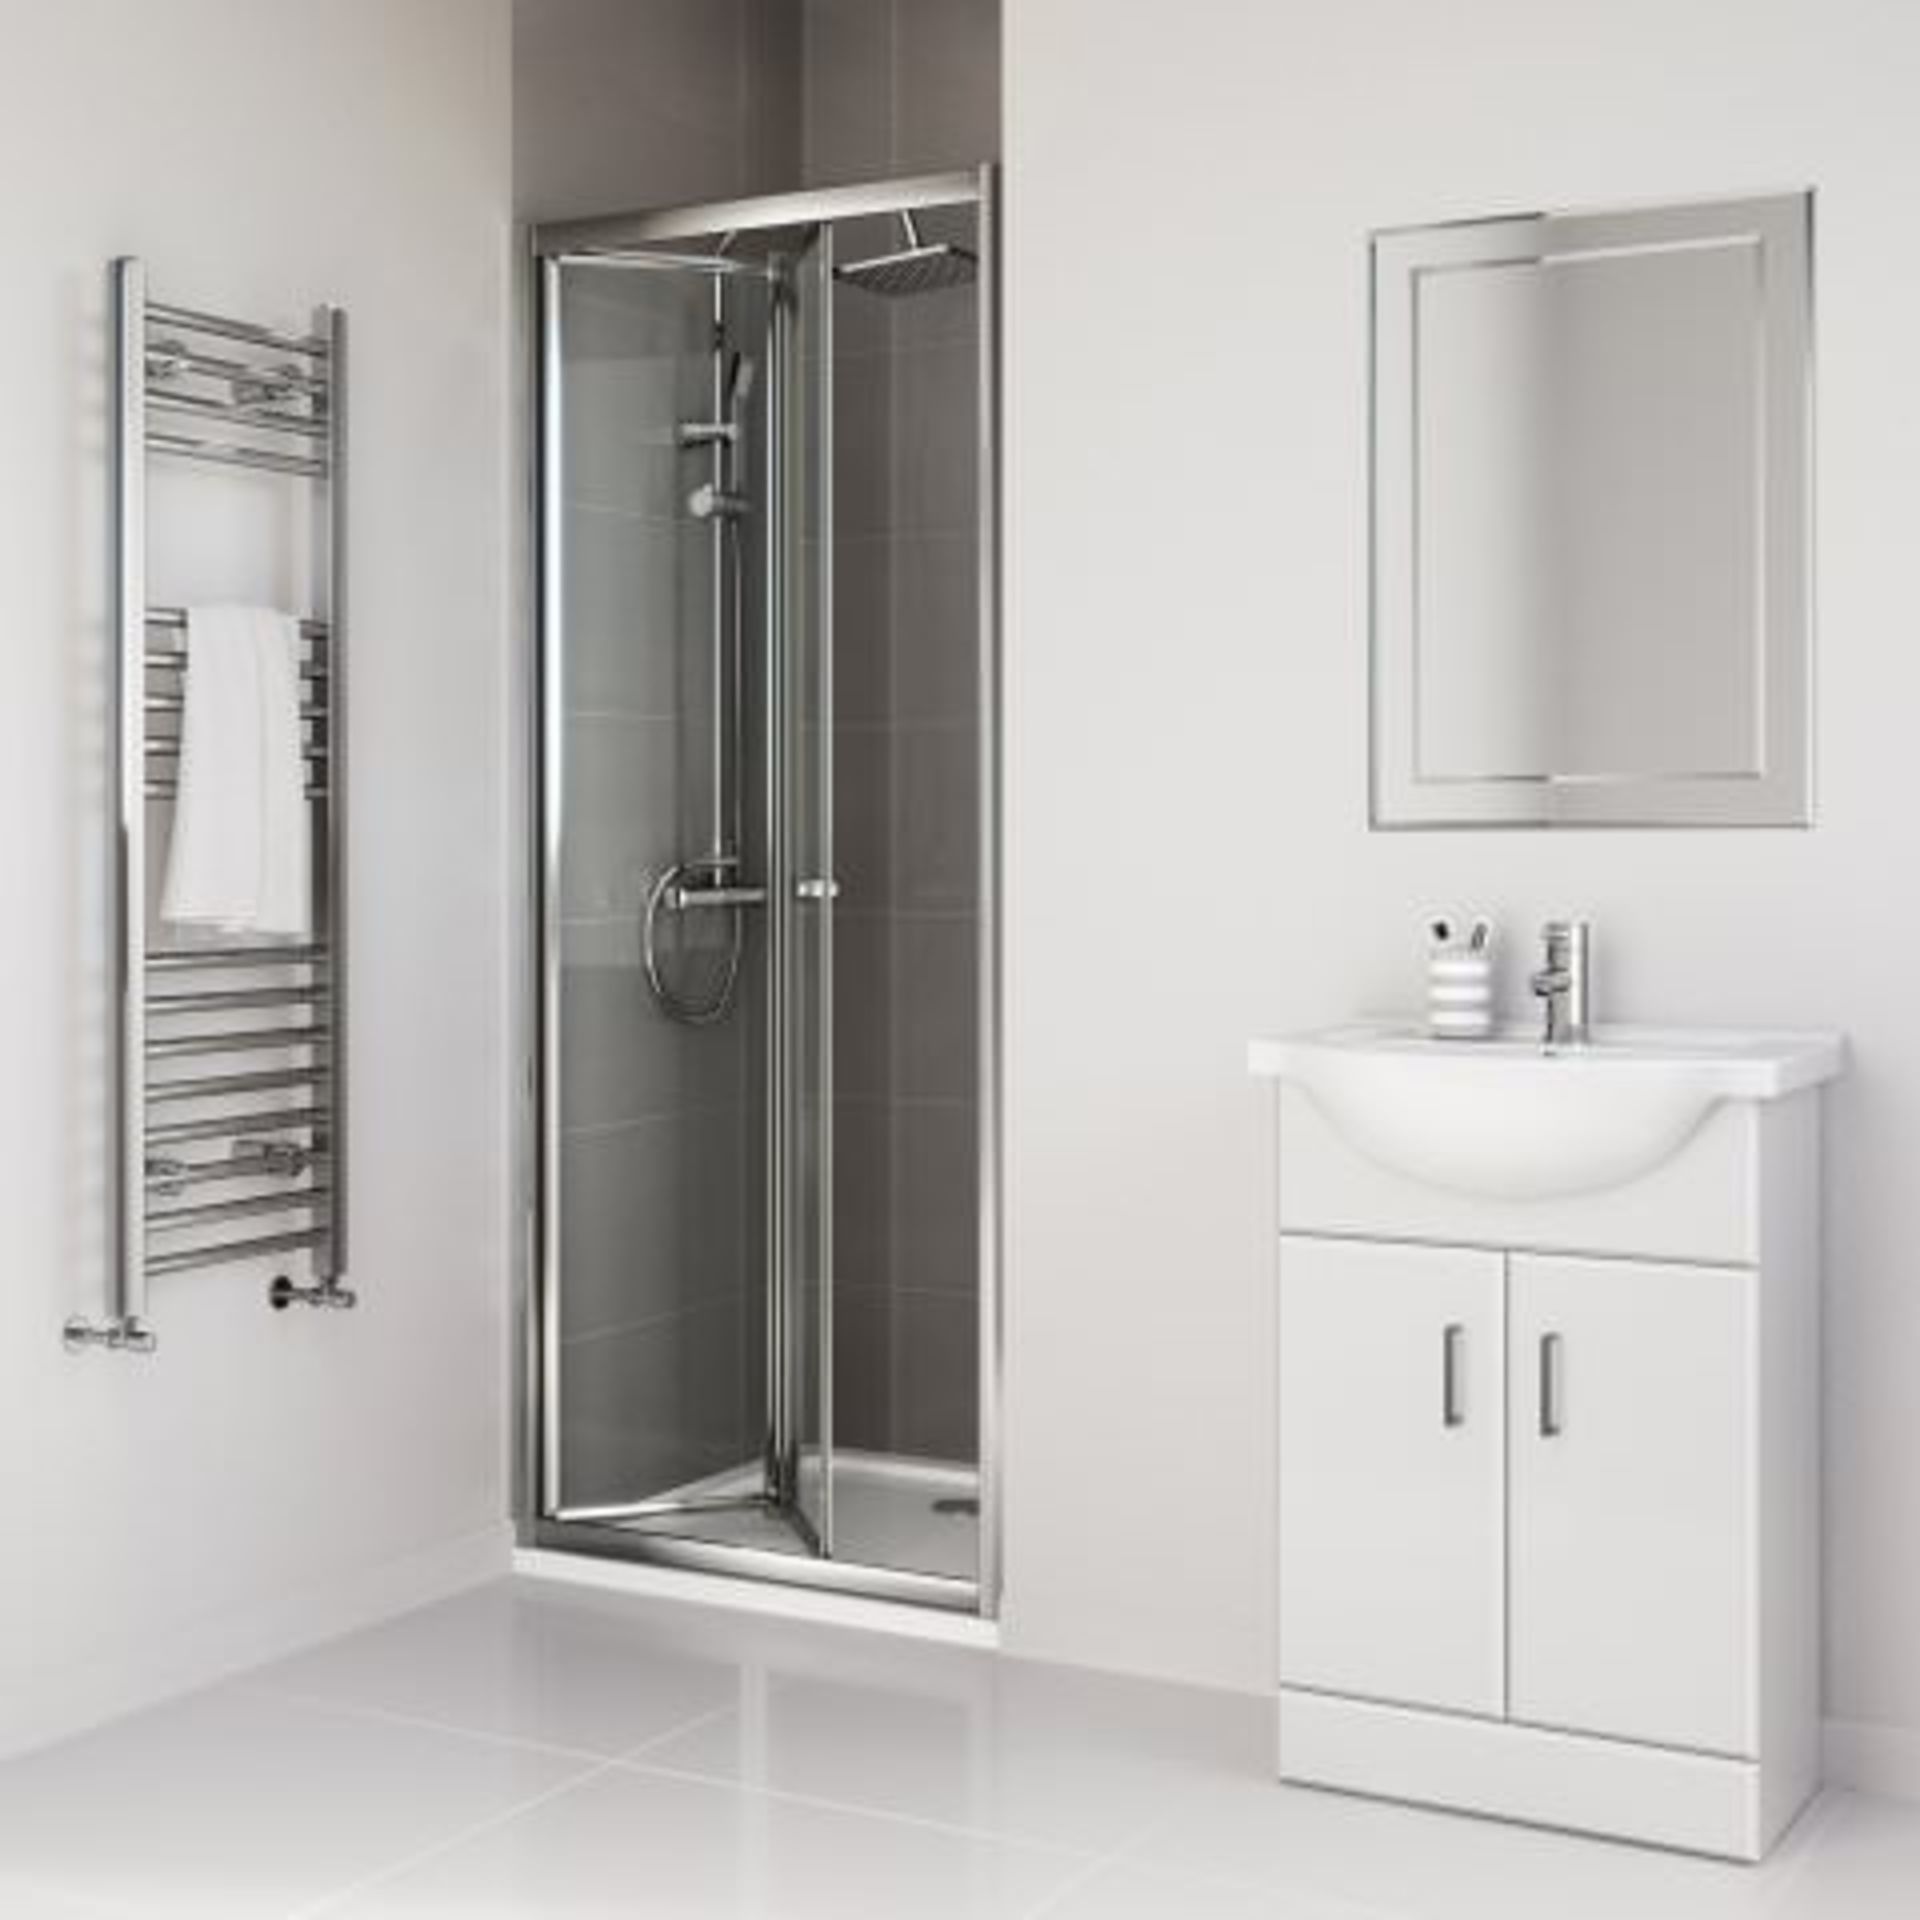 (T261) 700mm - Elements Bi Fold Shower Door RRP £299.99. Do you have an awkward nook or a tricky - Image 4 of 9